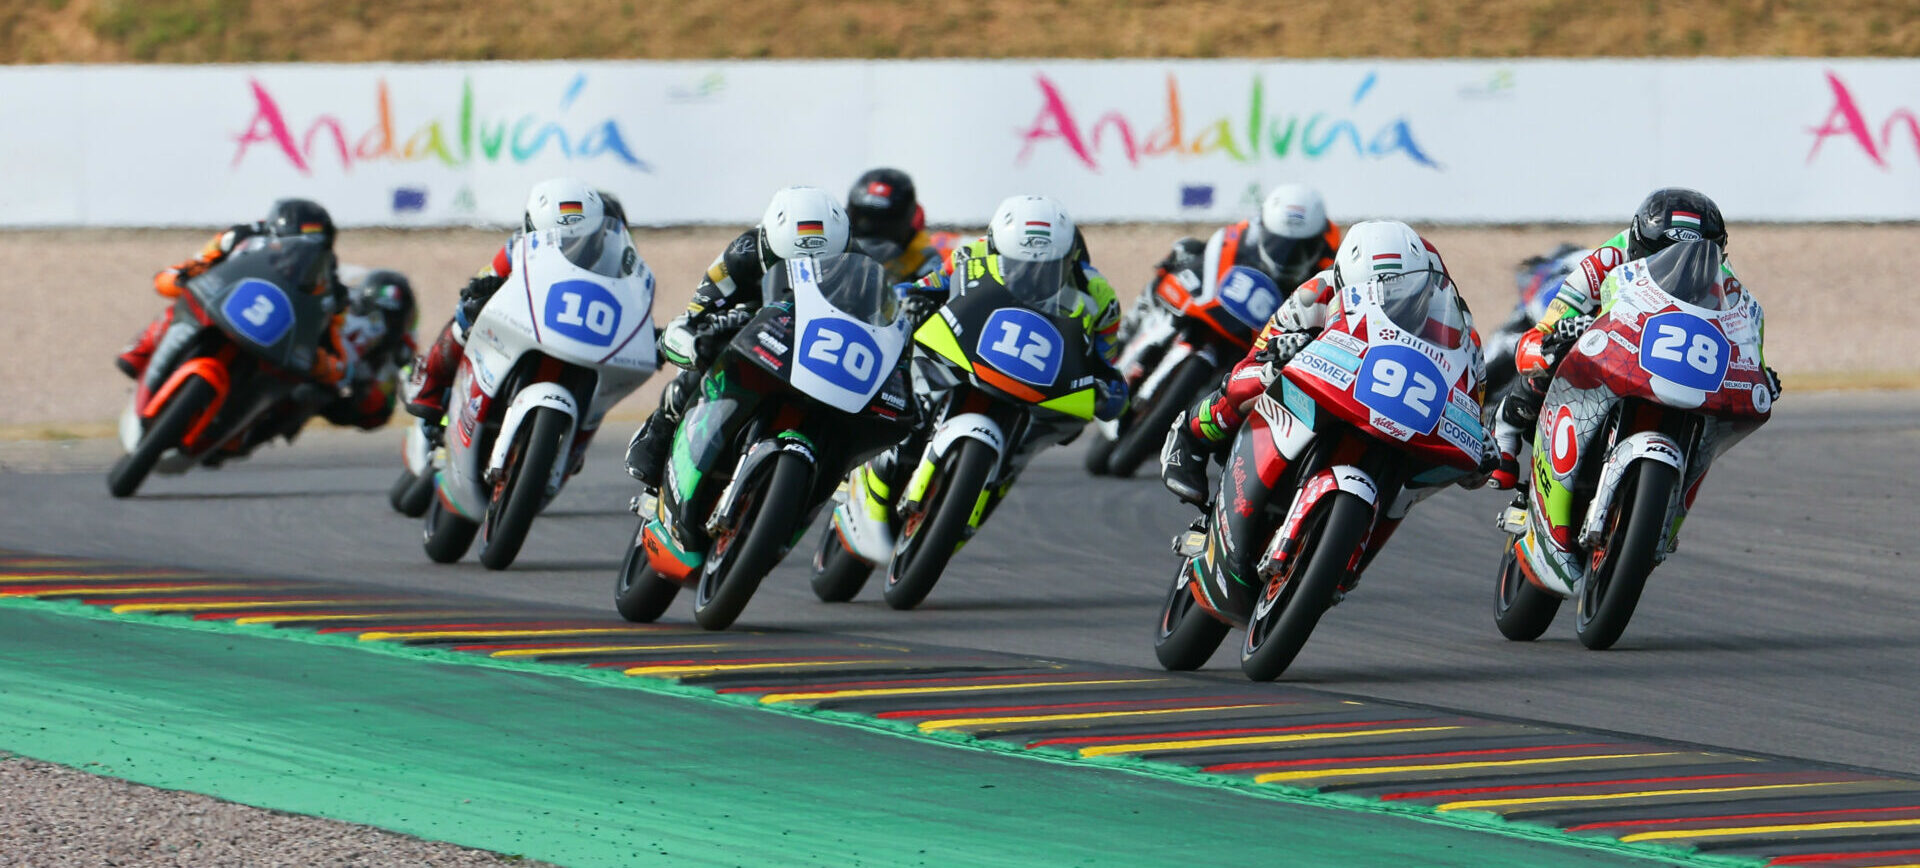 American-born Rossi Moor (92) leading Kevin Farkas (28), Dustin Schneider (20), and the rest during Northern Talent Cup Race Two at Sachsenring in 2022. Photo courtesy Dorna.